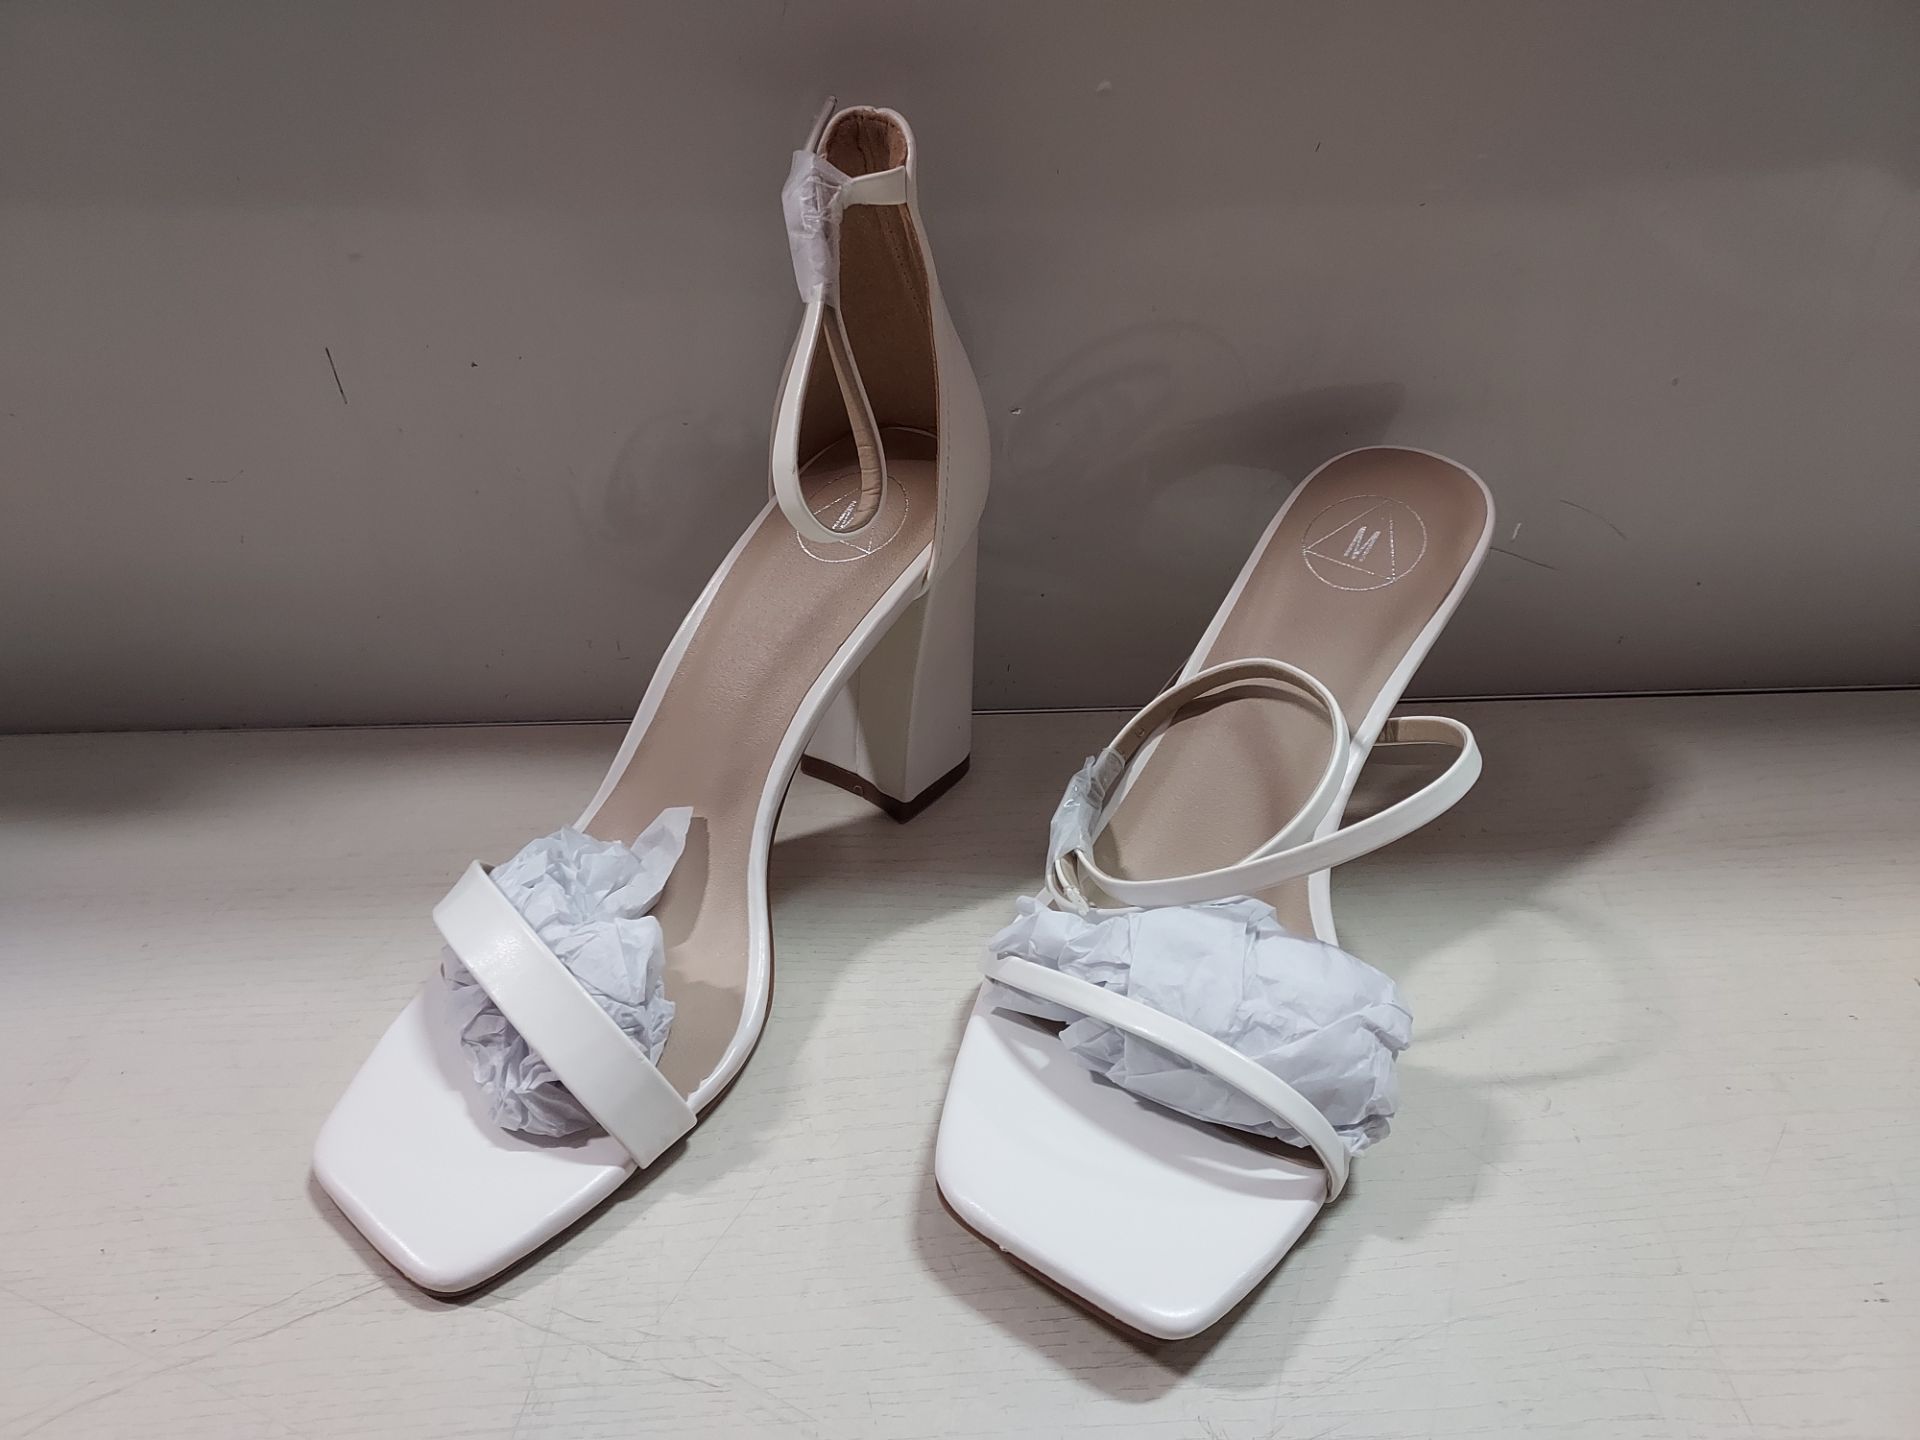 20 X BRAND NEW MIXED MISSGUIDED WOMANS SHOES TO INCLUDE BARELY THERE LOW HEEL SANDALS / WF BARELY